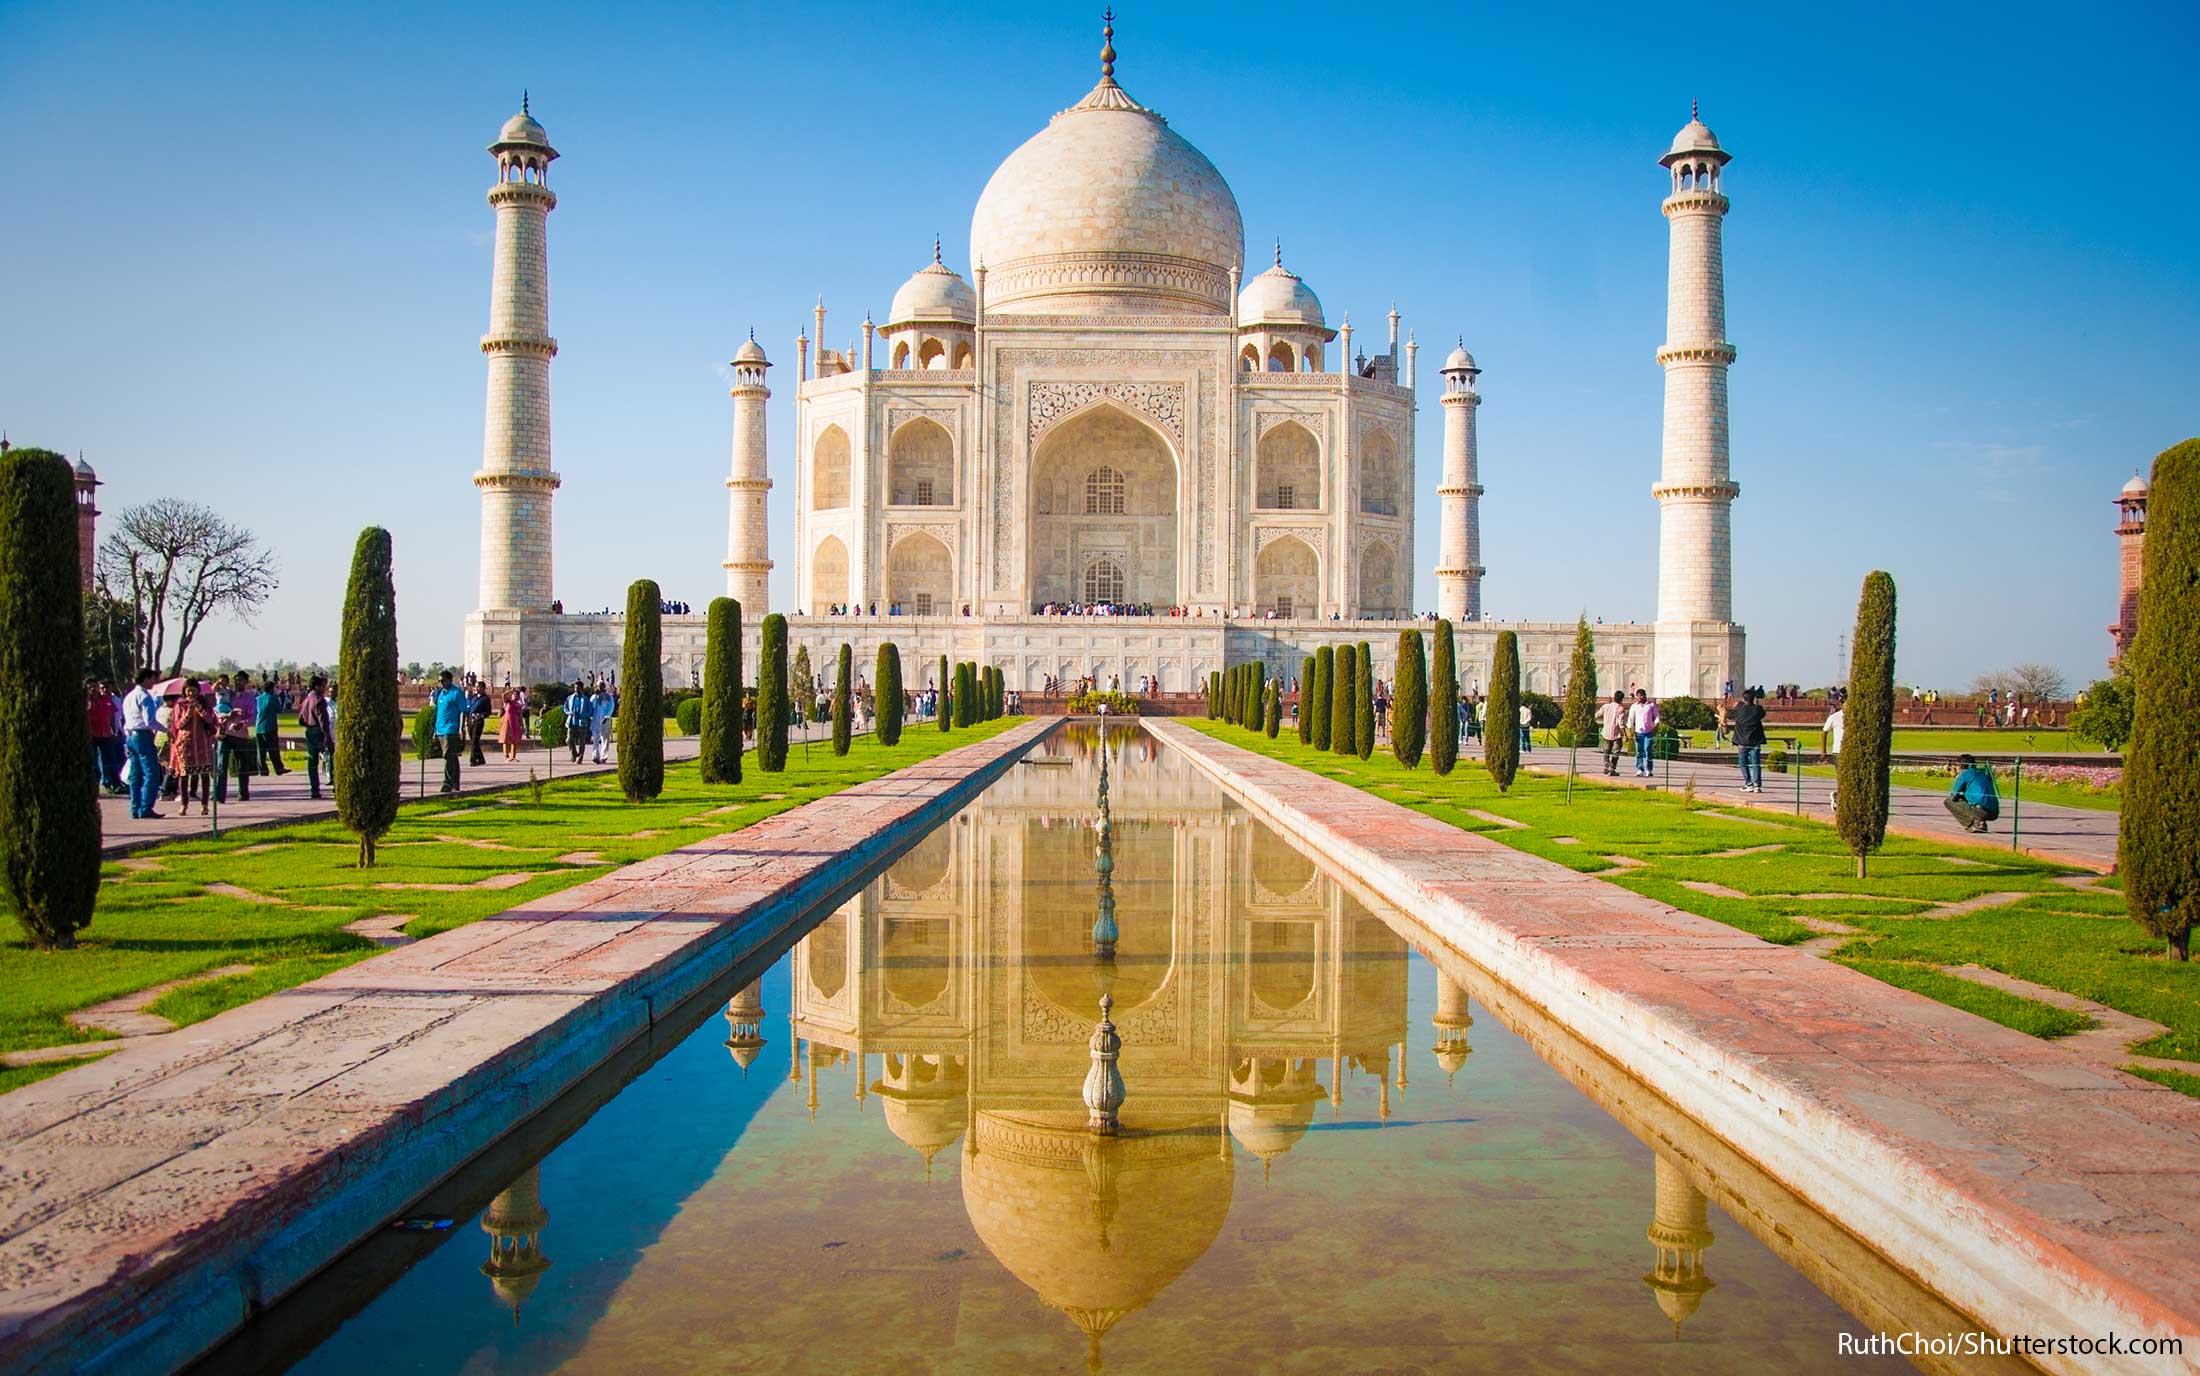 <p>While India's not everyone's first idea for an international vacation, <a href="https://www.kevmrc.com/">travel blogger</a> Kevin Mercier is hoping that changes in 2022.</p> <p>"I believe India is one of the countries more travelers need to start researching in 2022," Mercier said. "Travelers can find everything from the beautiful mountains, beaches, wildlife tours, to culinary delights and delicious local drinks here. India is also one of the best yet cheapest locations for a romantic vacation."</p> <p>How affordable? Right now, very affordable given the favorable currency exchange rate from rupees to dollars.</p> <p>"Unless you're looking to stay at a five-star hotel or resort, you'll find it hard to spend $50 a day here. You can get by on around $30 in most Indian cities by staying at cheap guest houses instead of hotels. The average price for a single person for accommodation in India is around 1,120 rupees ($15 USD)."</p> <p><em><strong>See: <a href="https://www.gobankingrates.com/saving-money/travel/30-locations-priciest-vacation-rentals/">30 Locations With the Priciest Vacation Rentals</a></strong></em></p>